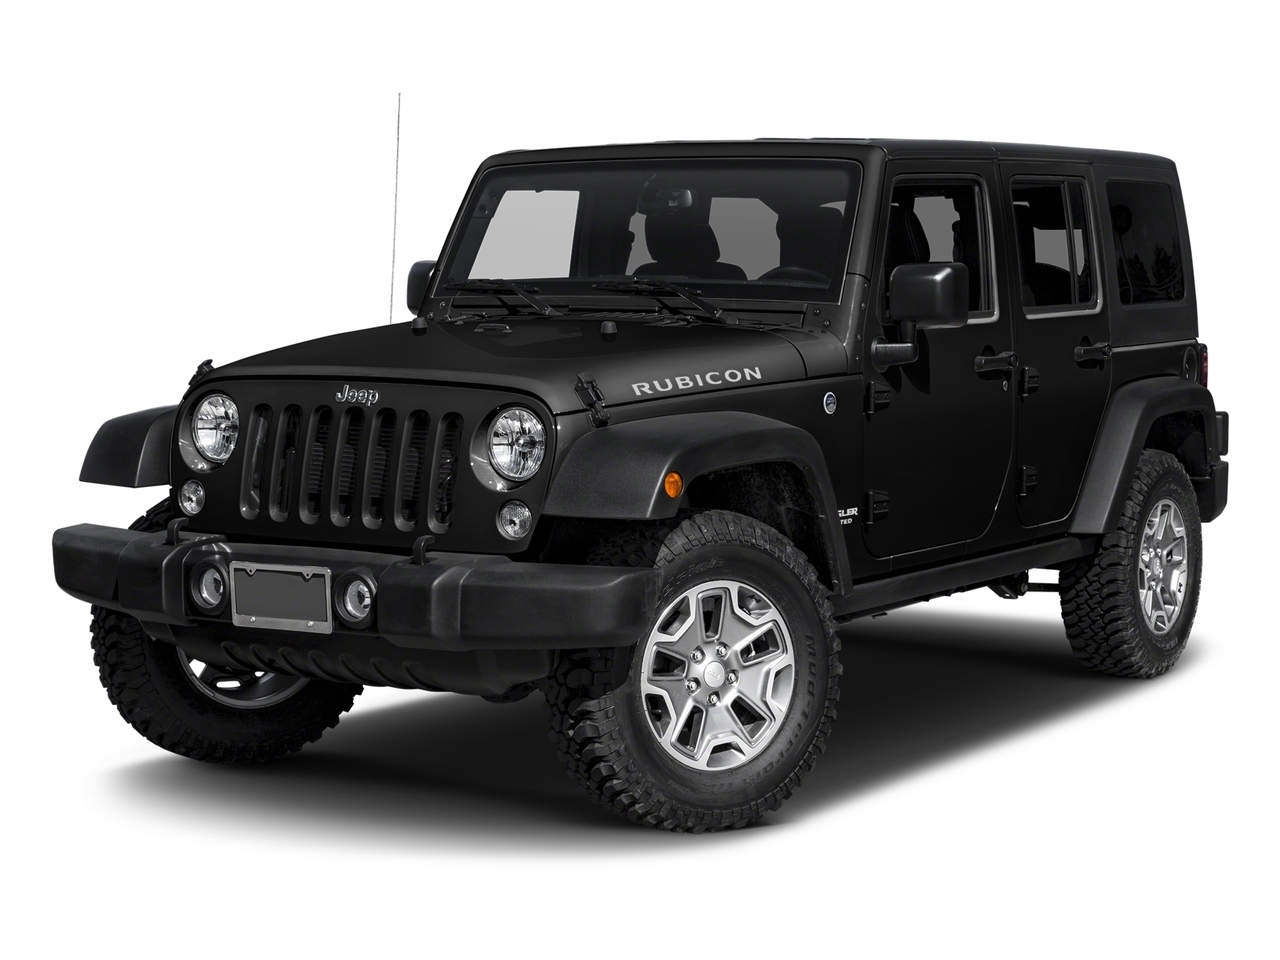 2017 Jeep WRANGLER UNLIMITED UNLIMITED RUBICON IN BLACK EQUIPPED WITH A 3.6L V6